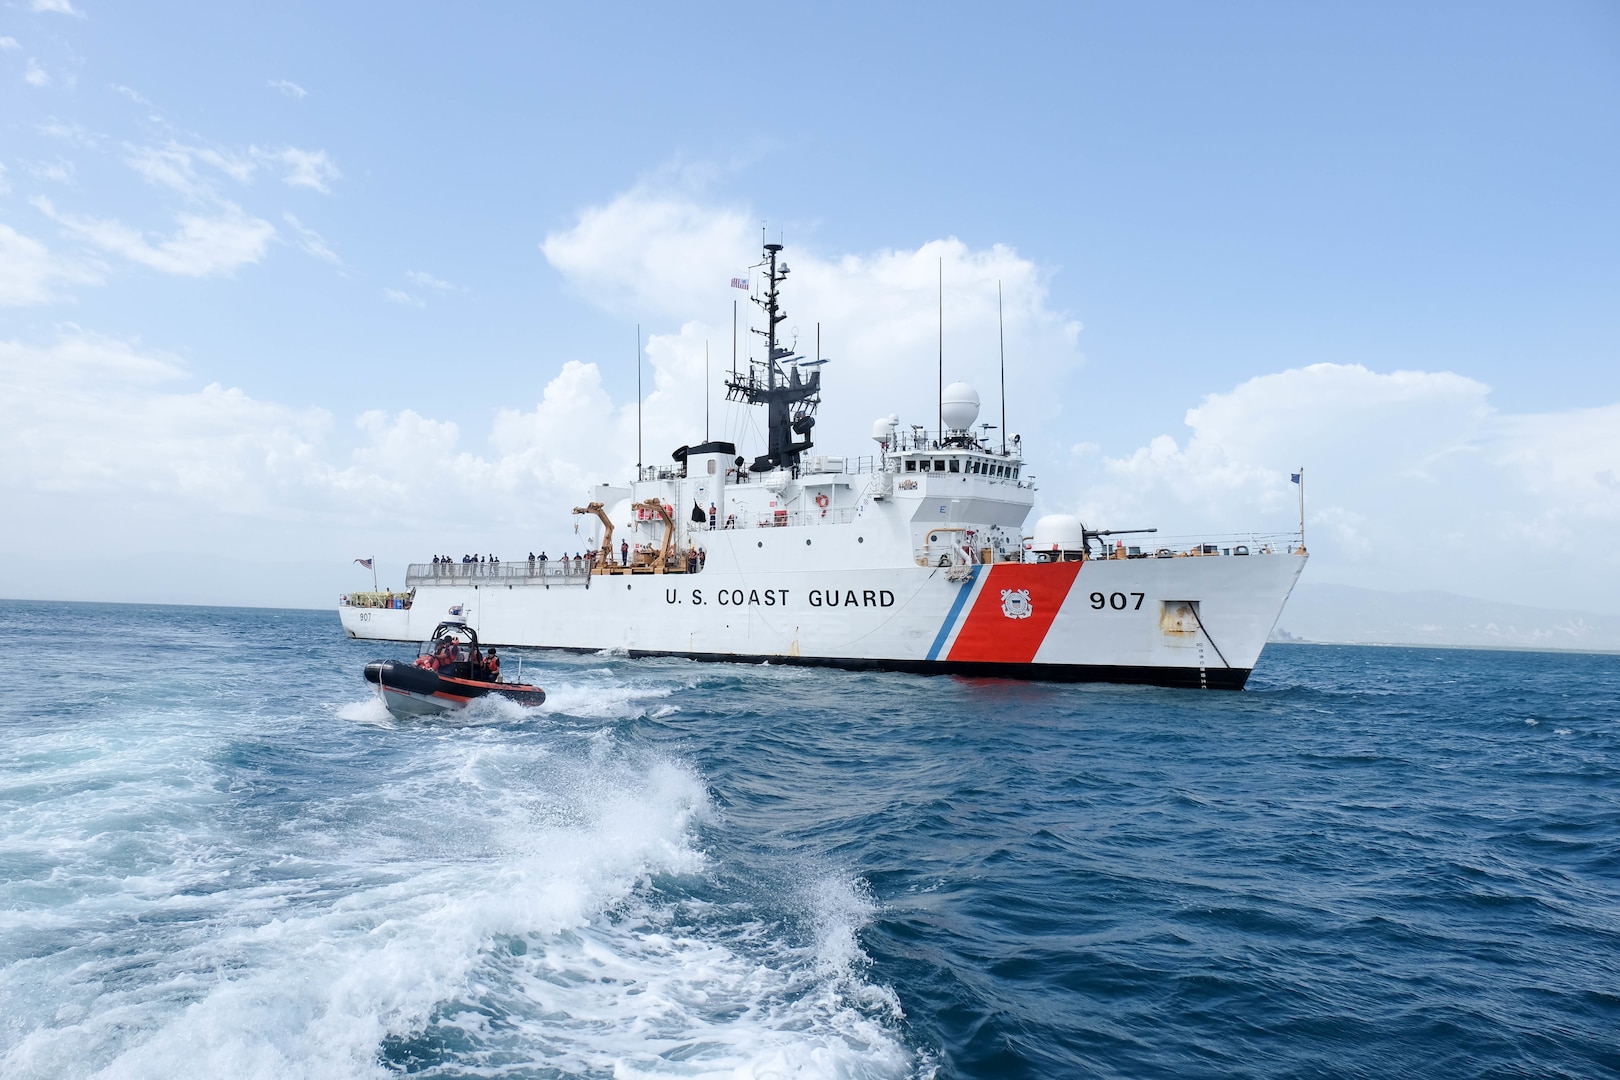 The Coast Guard Cutter Escanaba, a 270-foot medium endurance cutter homeported in Boston, and Escanaba’s small boat are underway for a personnel transfer offshore Haiti Wednesday, July 27, 2016. The cutter’s crew hosted Brian Shukan, deputy chief of mission at the U.S. Embassy in Haiti, and Michel-Ange Gedeon, director general of the Haitian National Police, for discussion of international search and rescue coordination and a tour of the cutter.